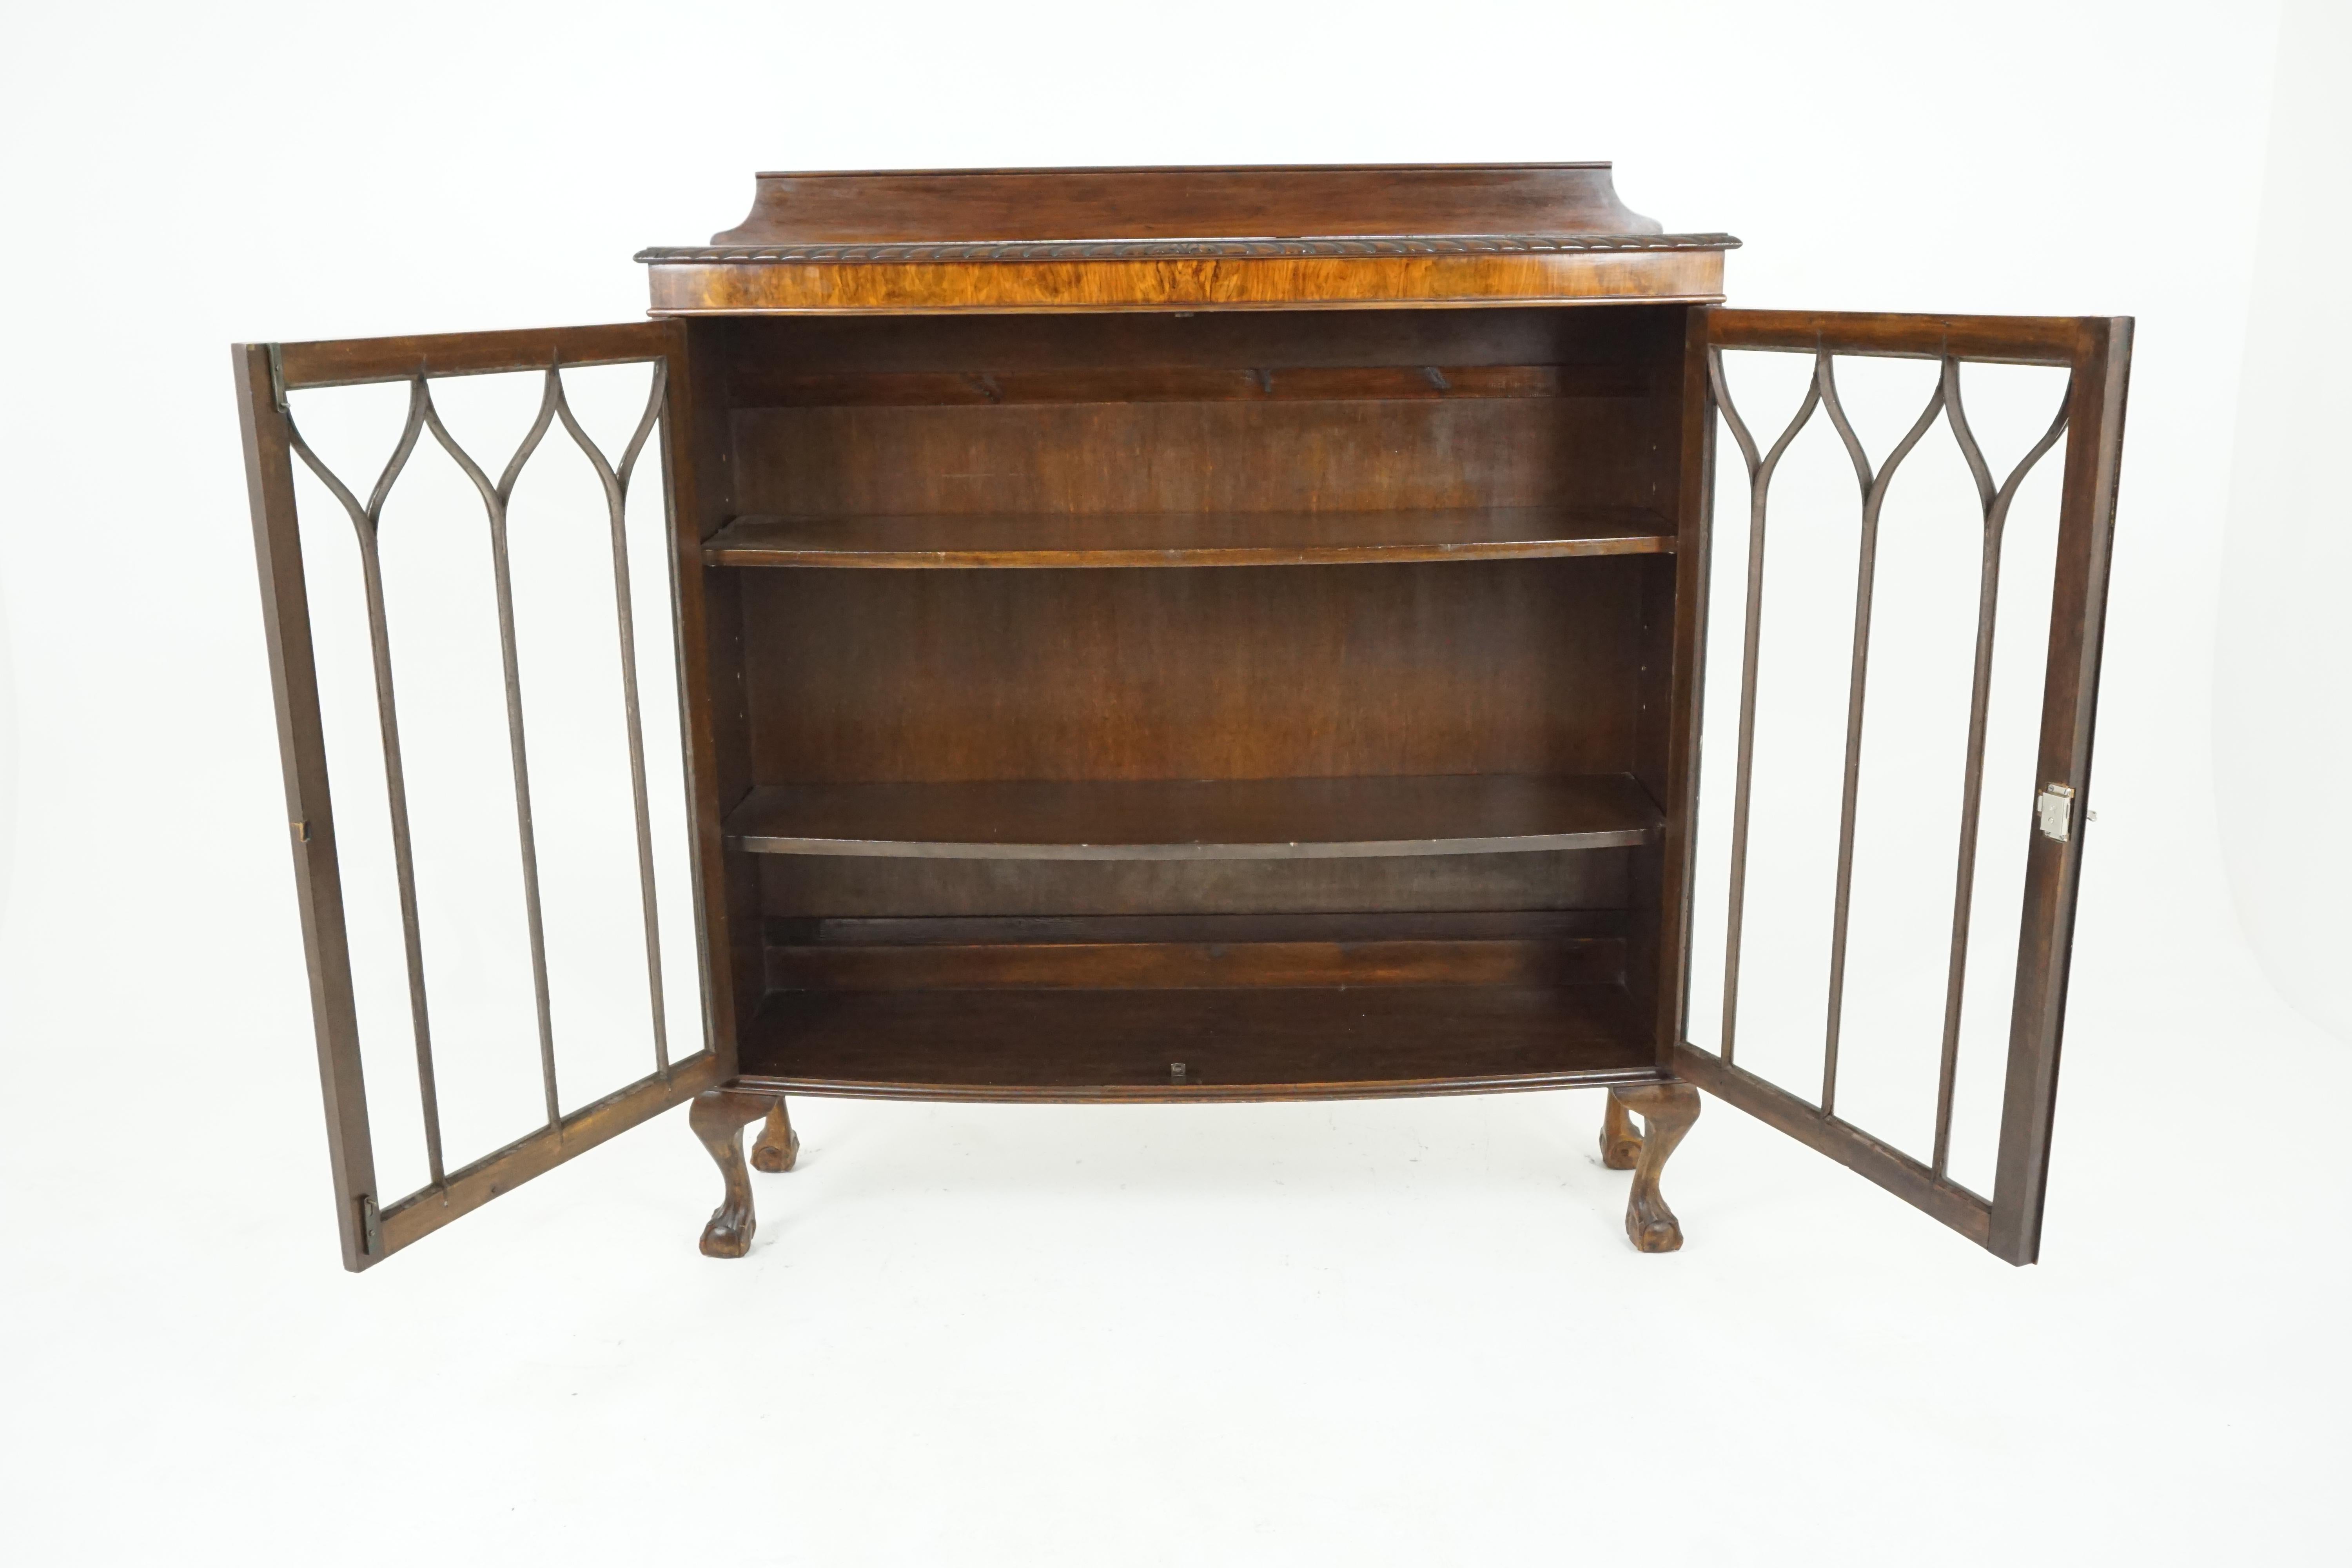 Antique walnut bookcase, bow front display cabinet or china cabinet, antique furniture, Scotland, 1920

Scotland. 1920
Solid walnut and veneer
Original finish
Raised back
Bow front top with pie crust edge
Pair of original glass doors with